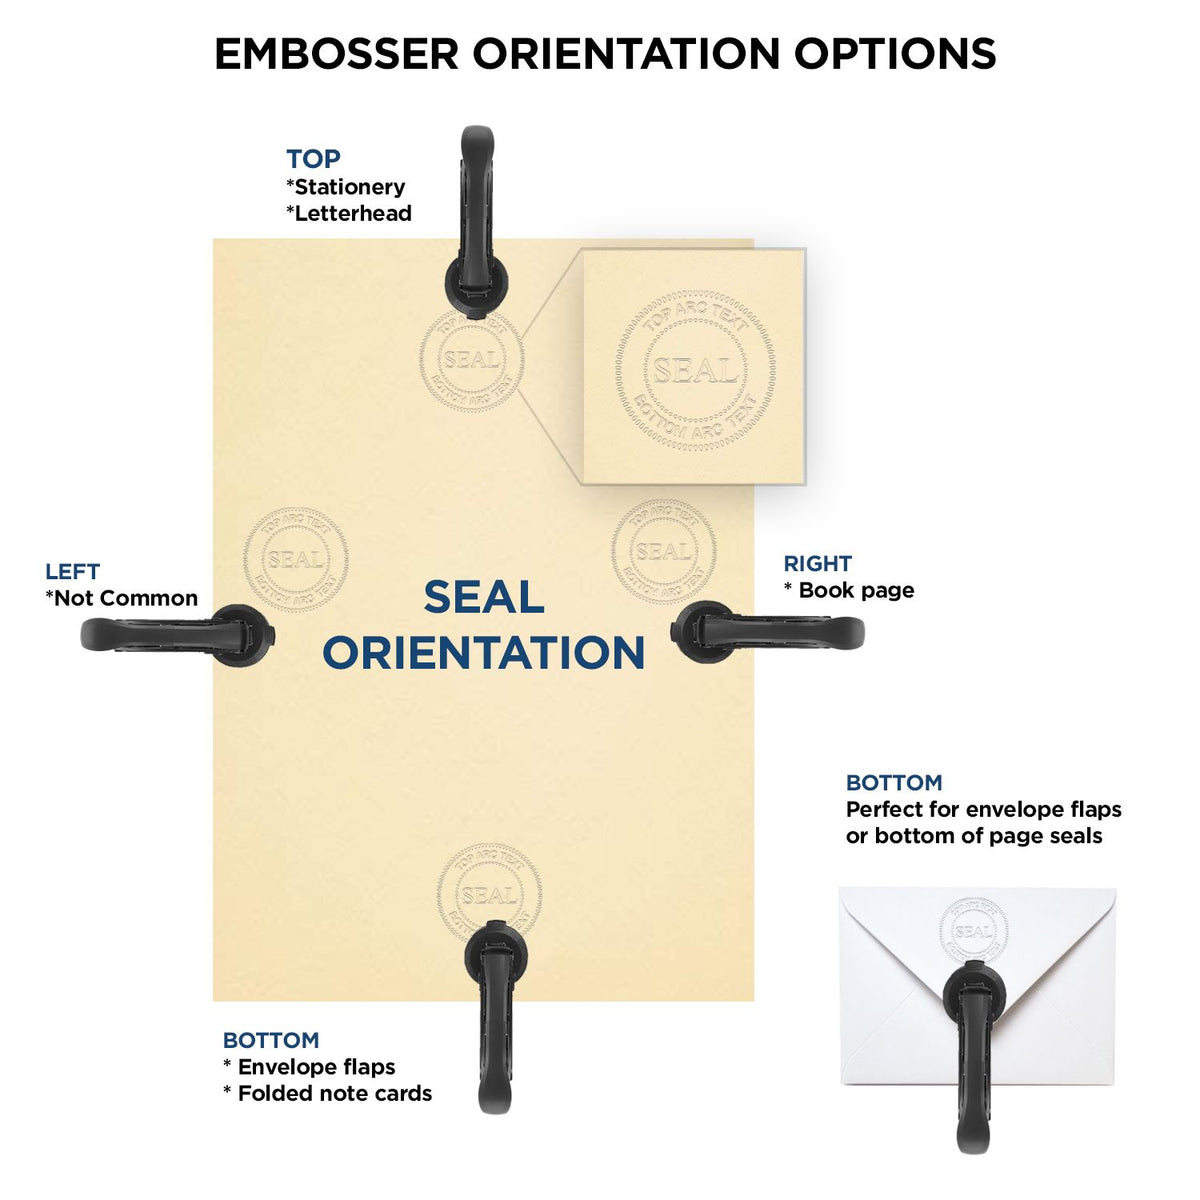 An infographic for the Delaware Engineer Desk Seal showing embosser orientation, this is showing examples of a top, bottom, right and left insert.